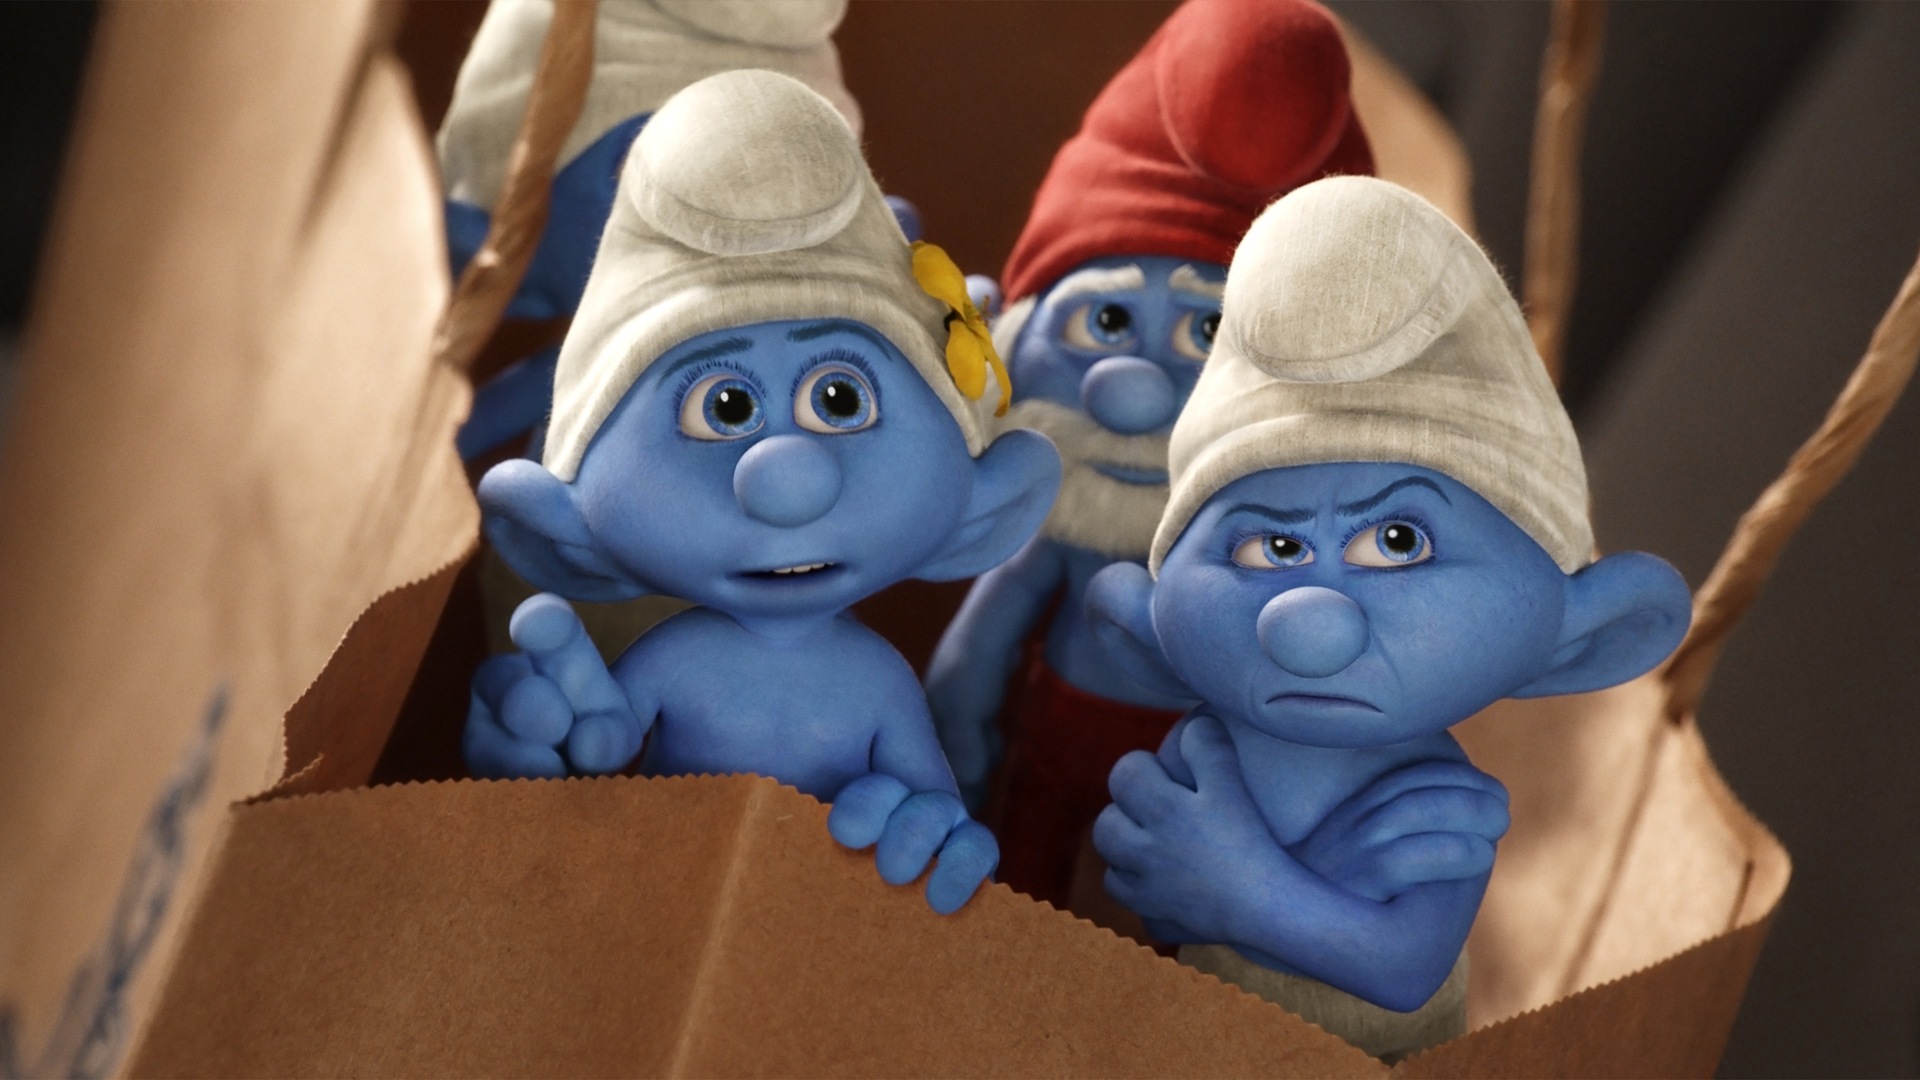 The Smurfs 2 HD movie wallpapers #12 - 1920x1080